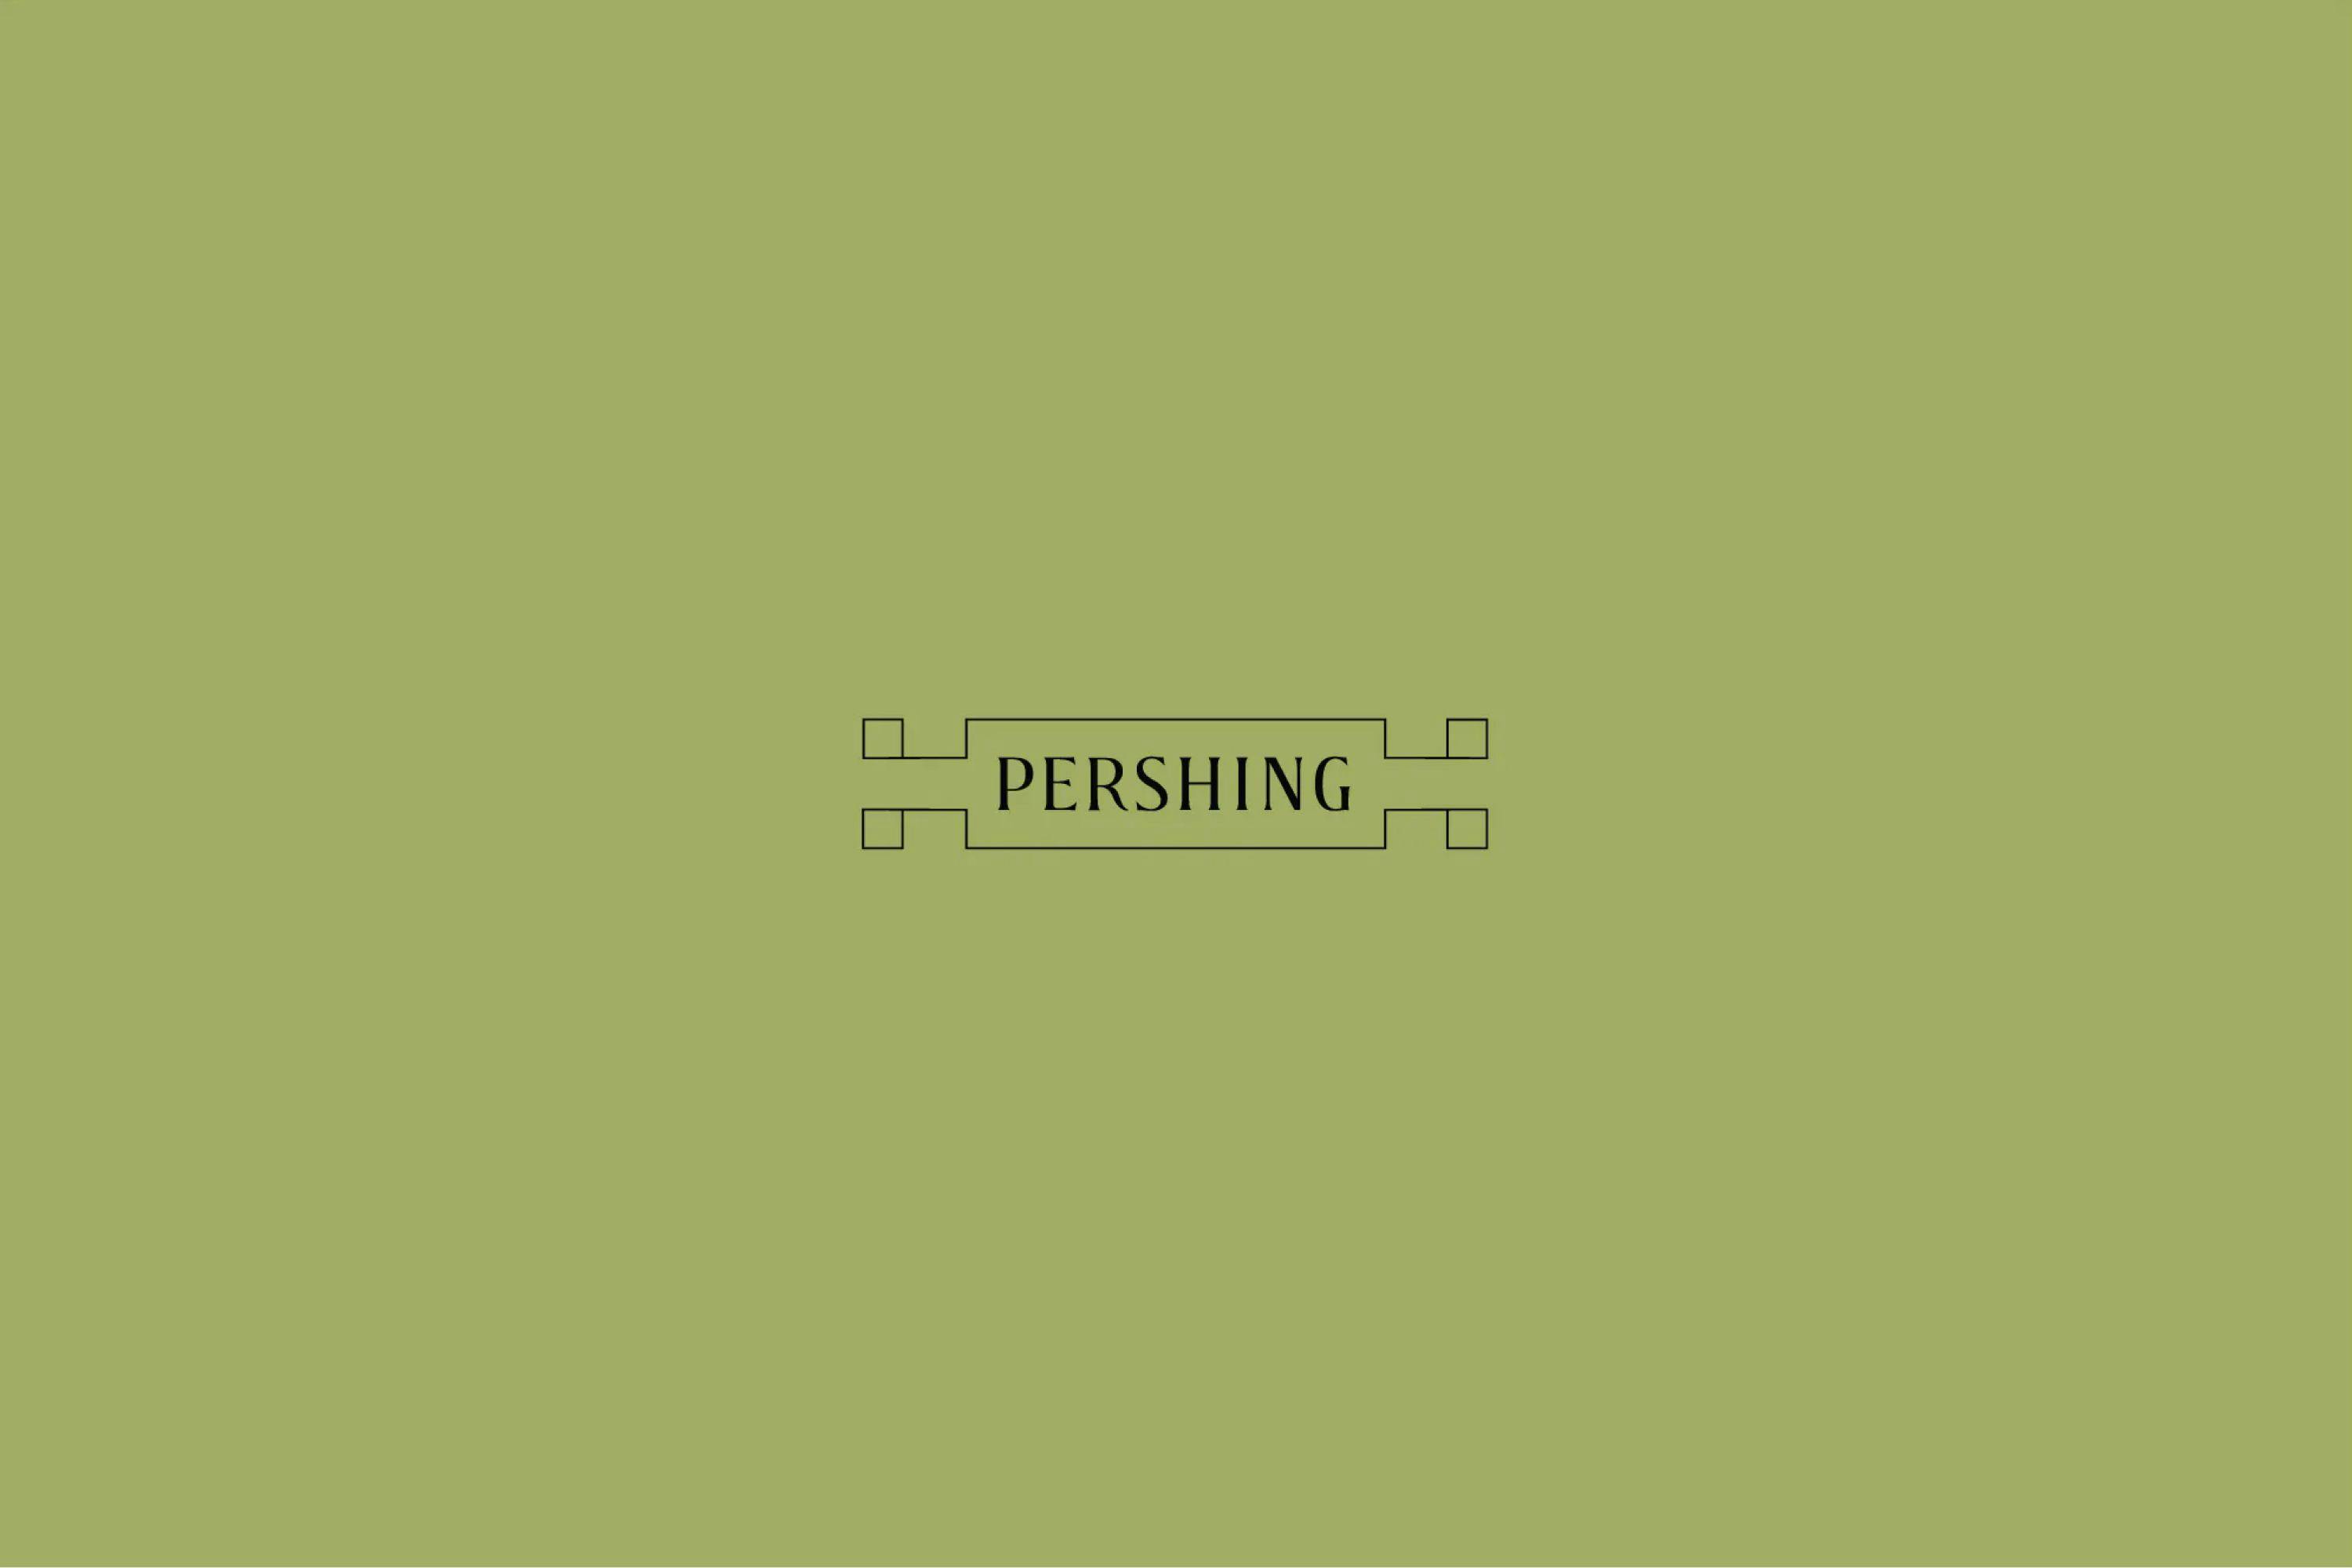 Perishing written in a design with a green background